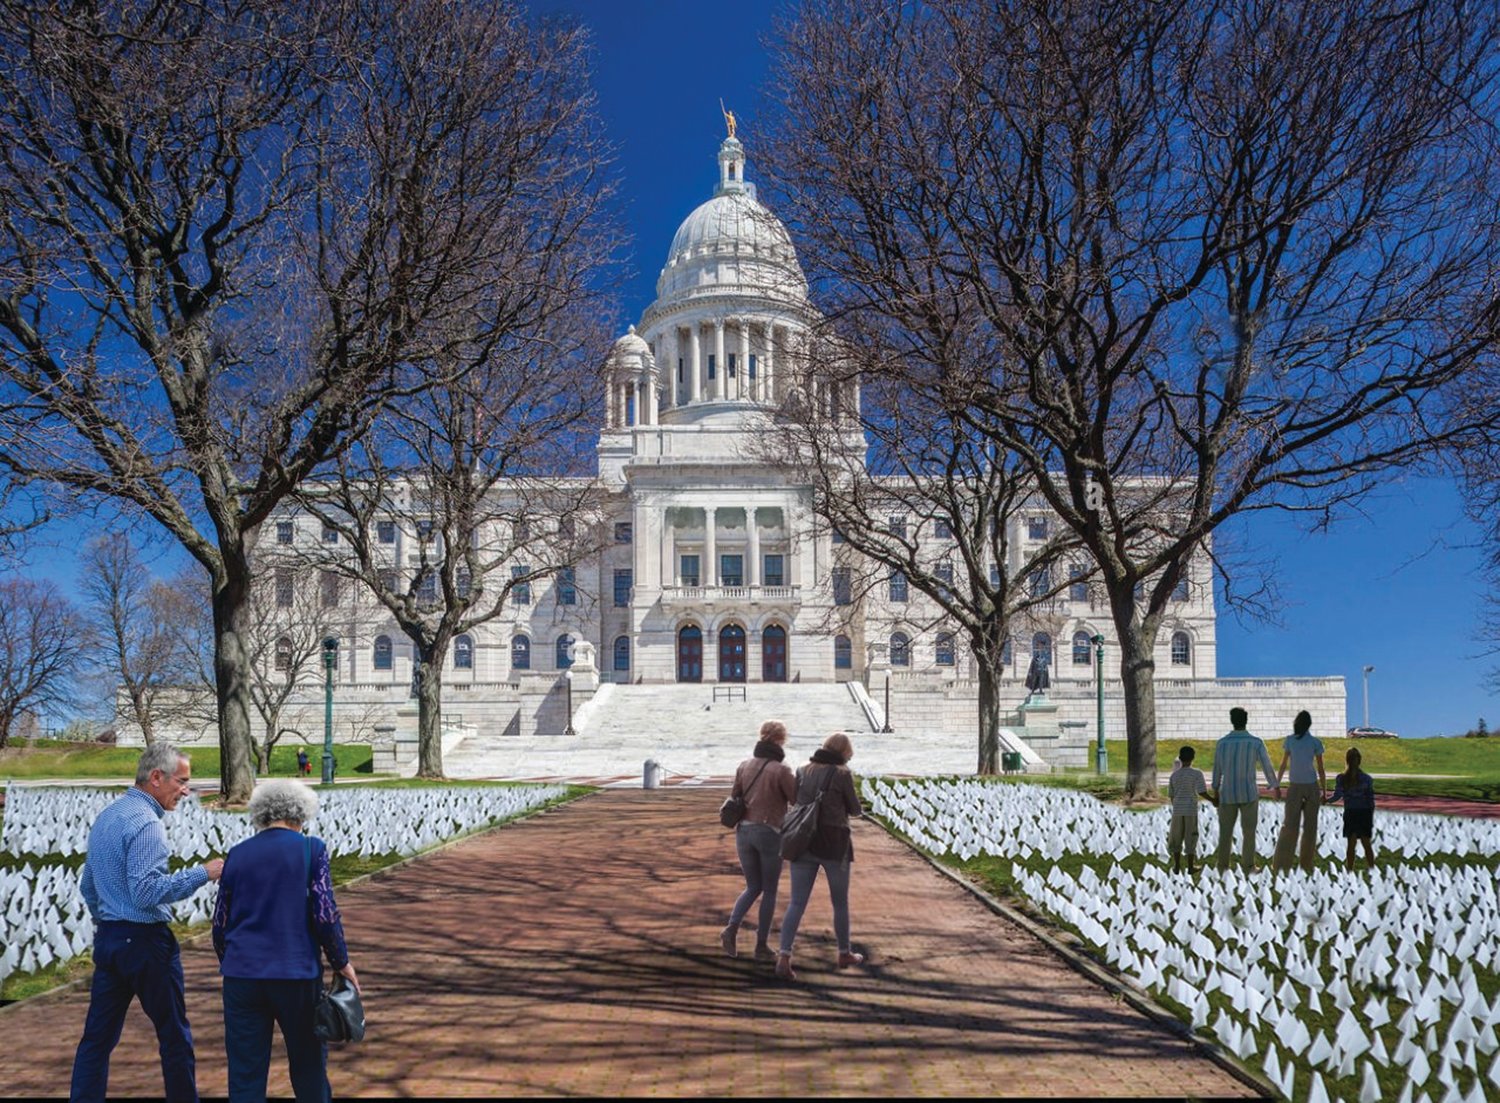 MEMORIAL VISION: The “Rhode Island Remembers COVID-19 Memorial” will be installed on the Rhode Island State House south lawn at the end of this month. This graphic representation shows what the memorial  will likely look like — with almost 4,000 flags (as of last Friday, 3,584 Rhode Islanders have died from COVID-19 infections) one for every COVID-19 death in Rhode Island.